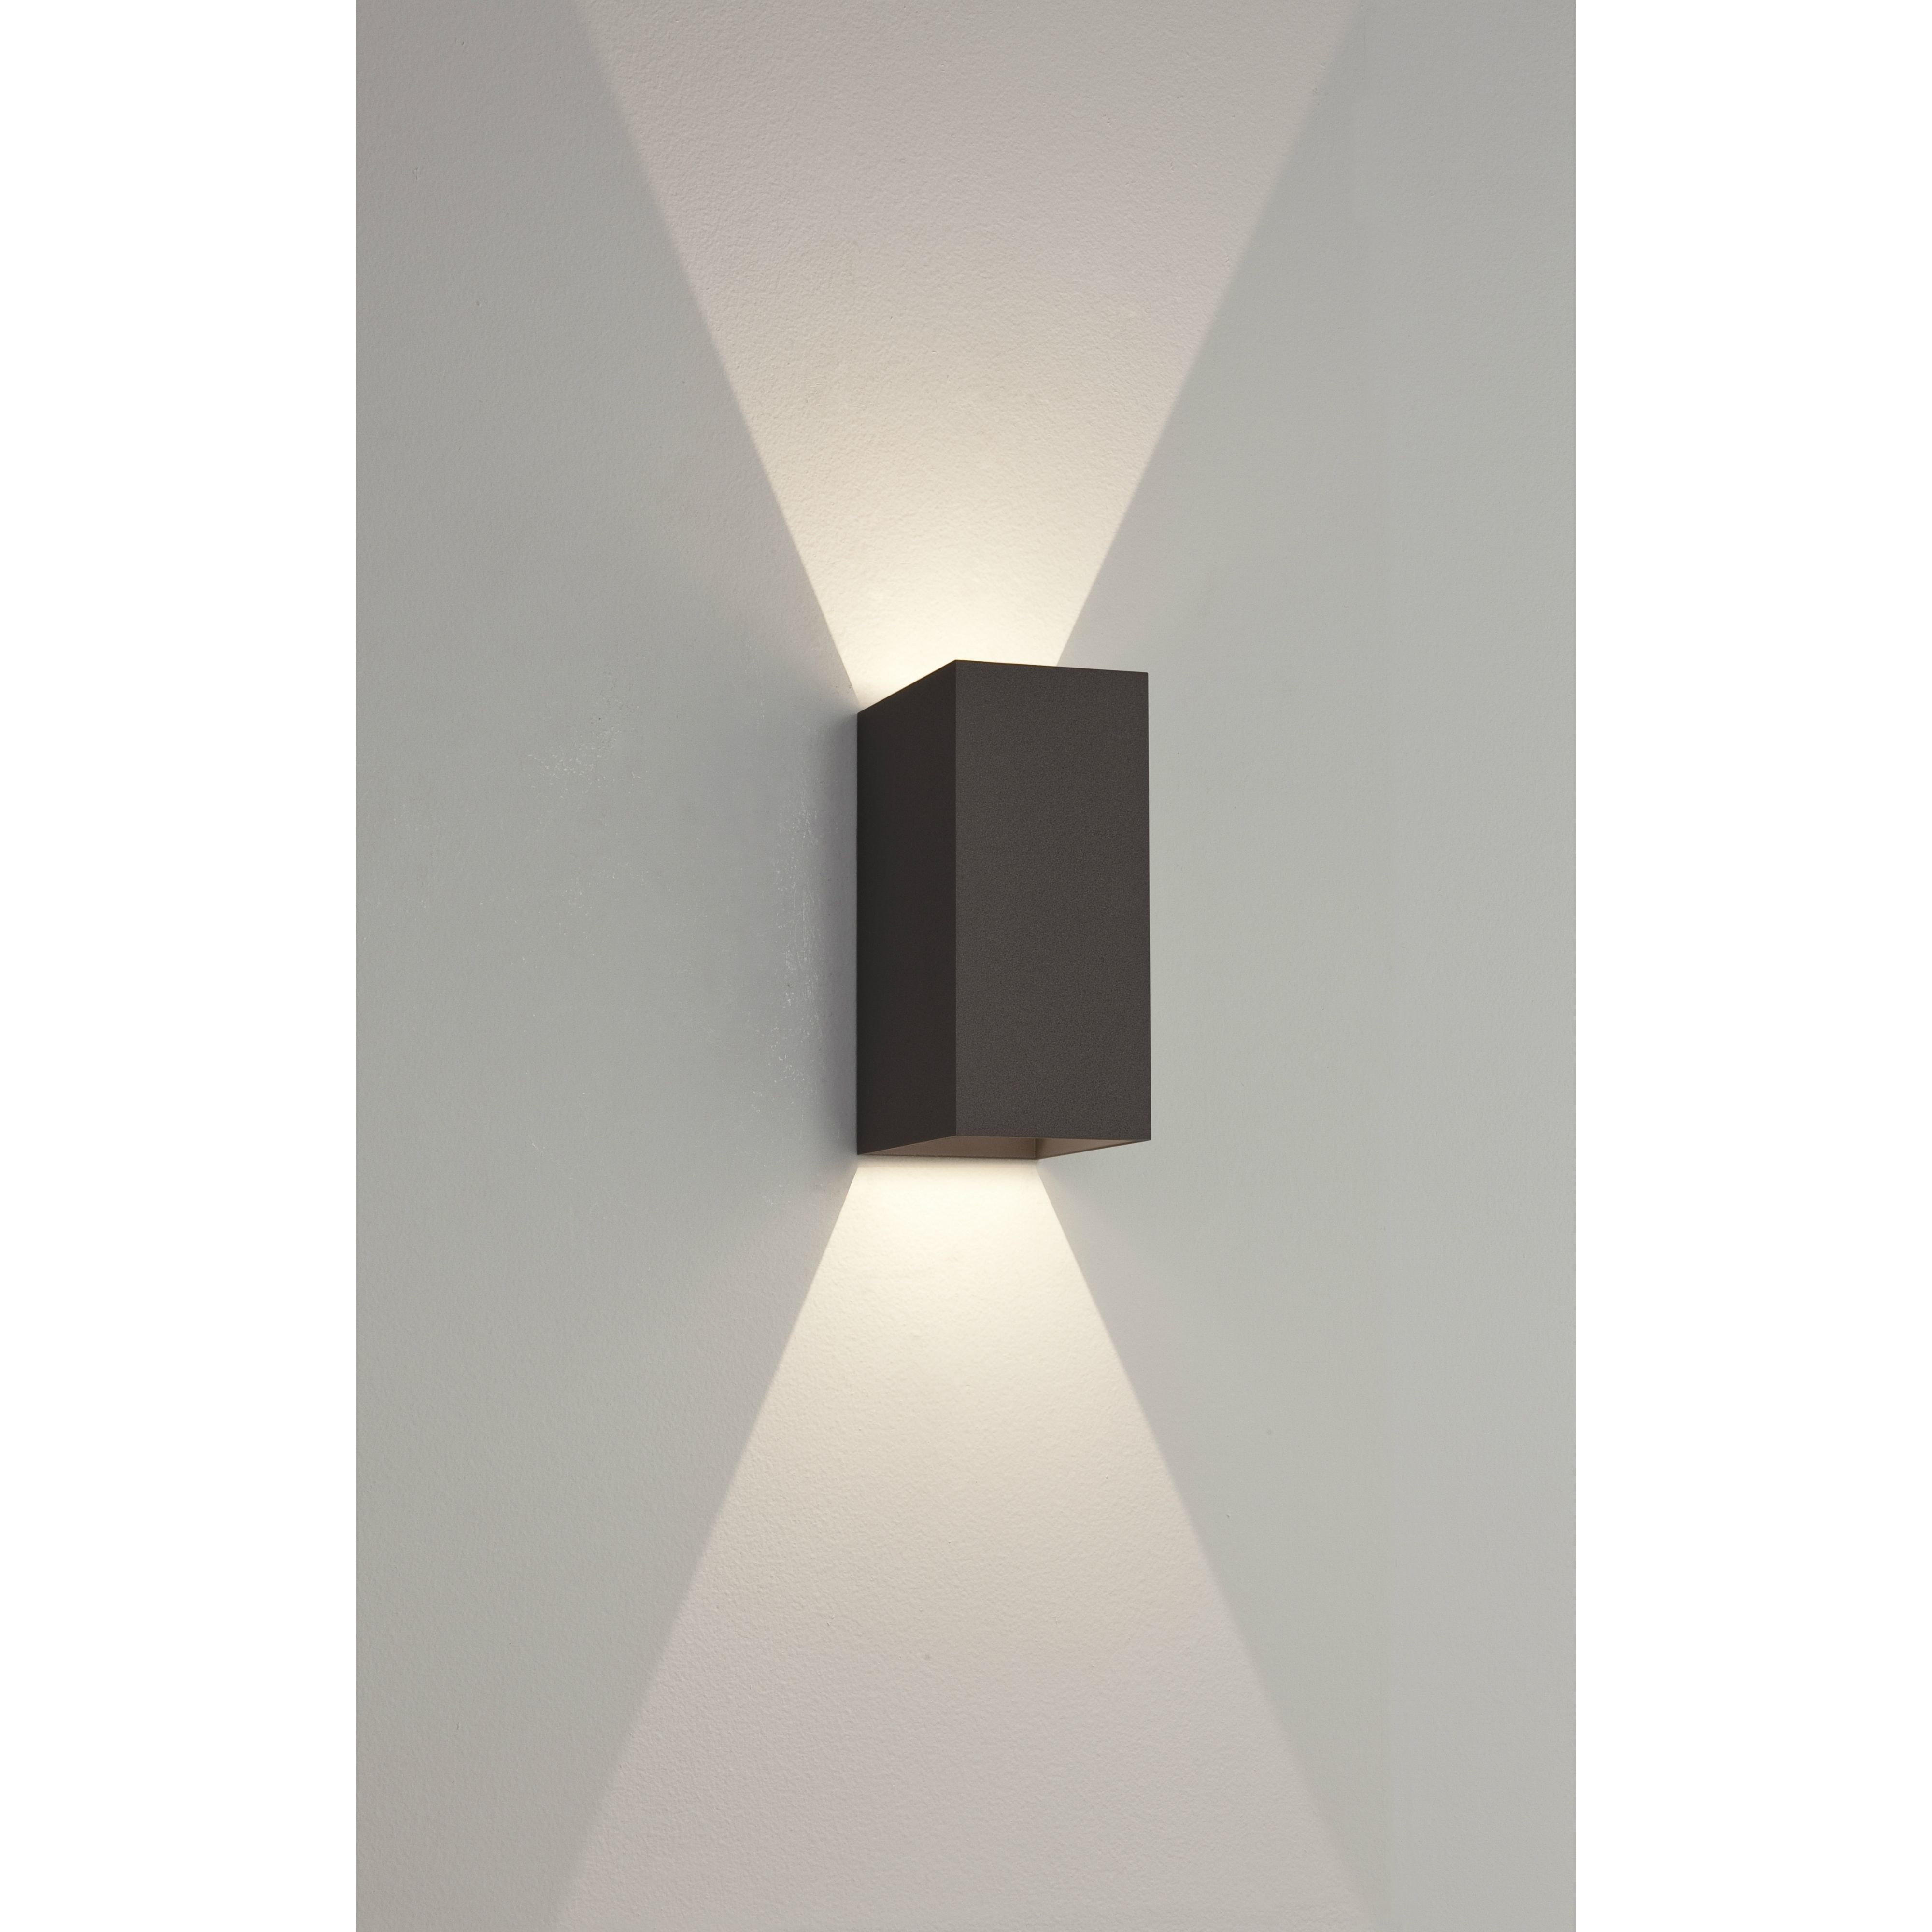 Half Wall Lanterns & Lights | Product Categories | Light Innovation With Regard To Rectangle Outdoor Wall Lights (View 12 of 15)